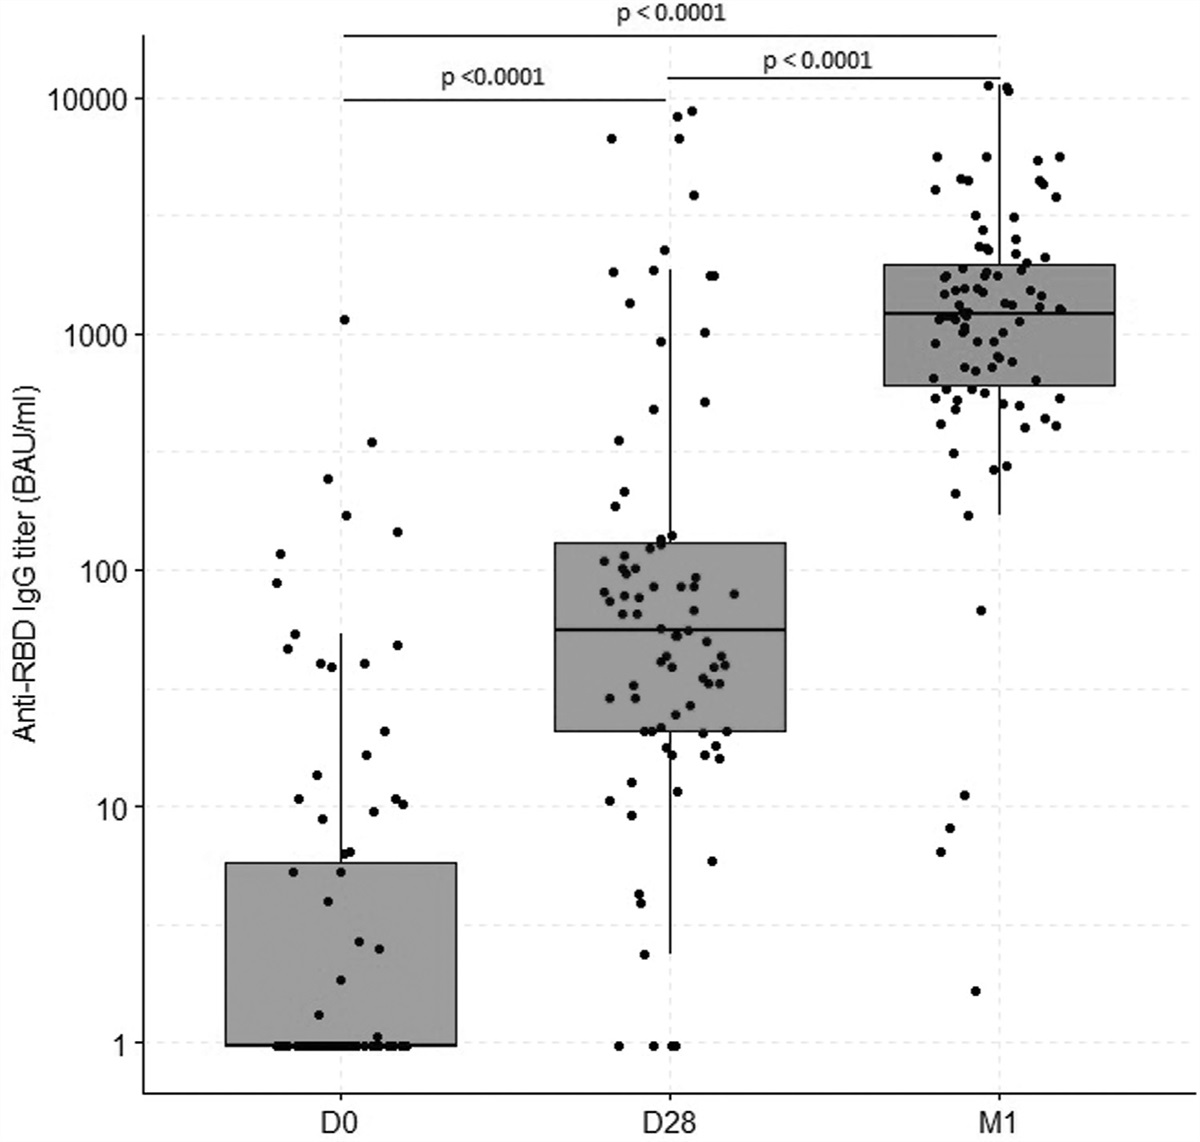 High seroconversion rate and SARS-CoV-2 Delta neutralization in people with HIV vaccinated with BNT162b2